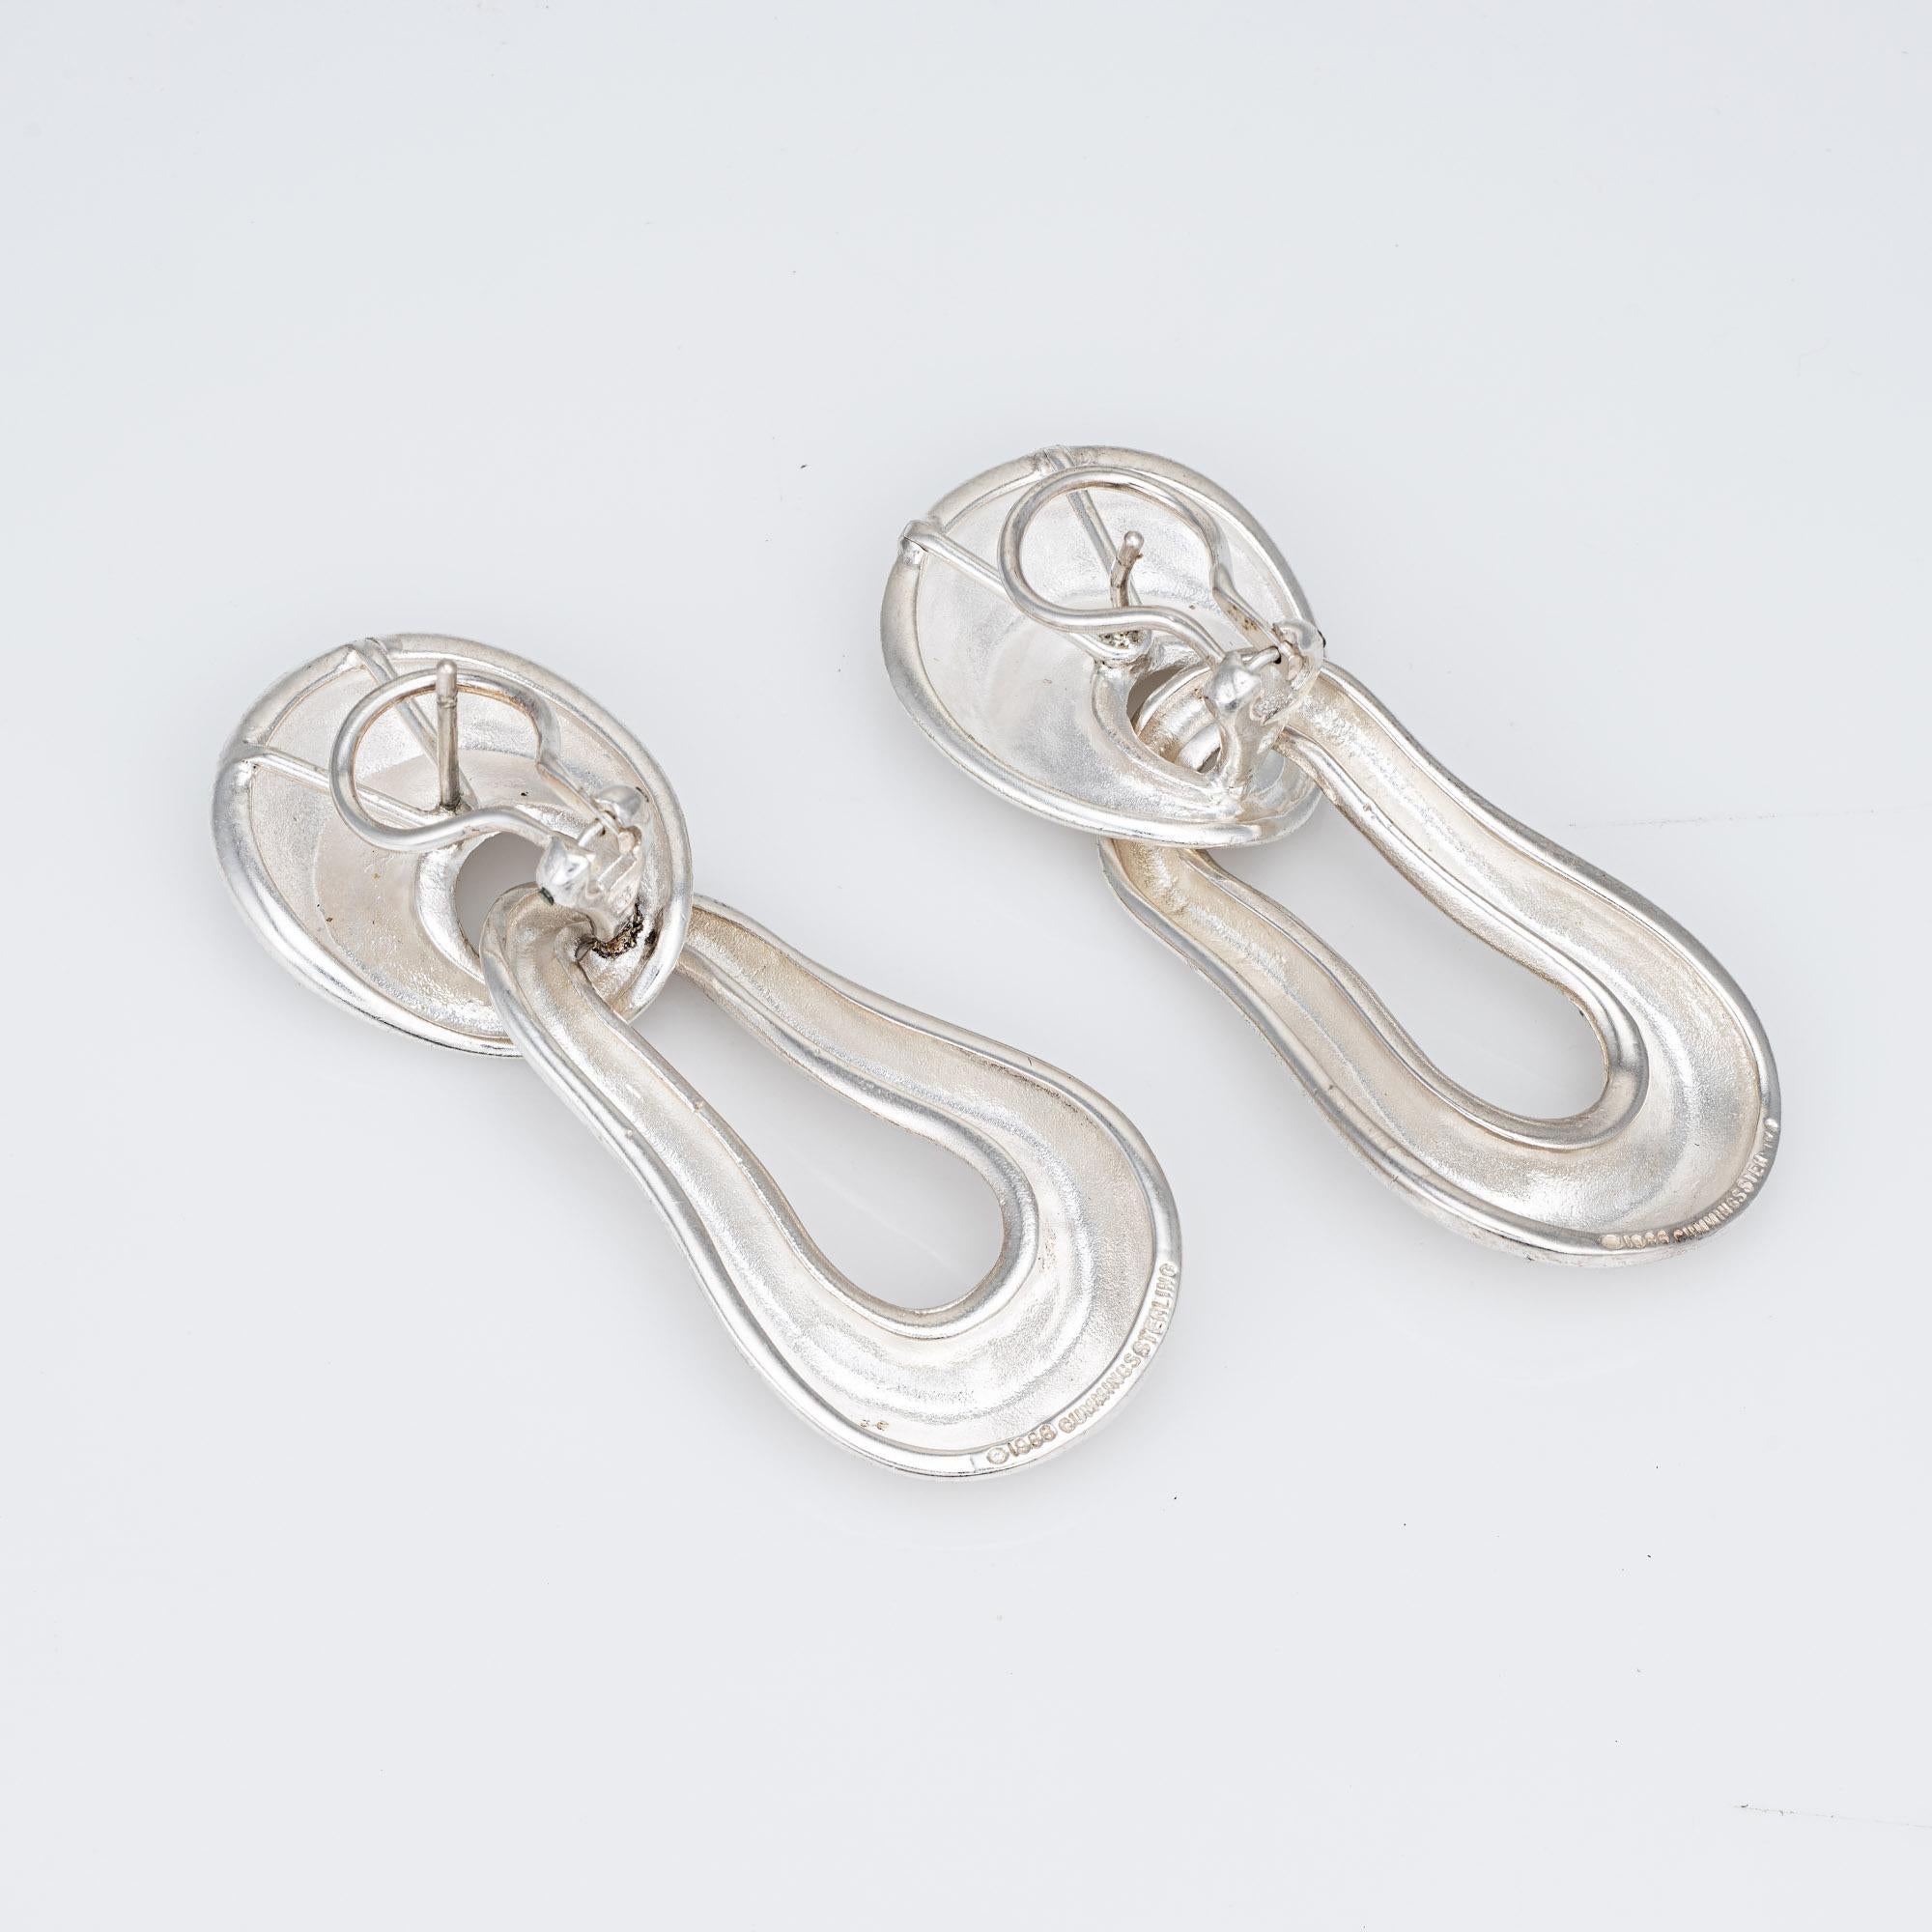 Finely detailed pair of vintage Angela Cummings earrings (circa 1988) crafted in sterling silver. 

The stylish earrings are crafted in sterling silver. With a light satin finish the 2